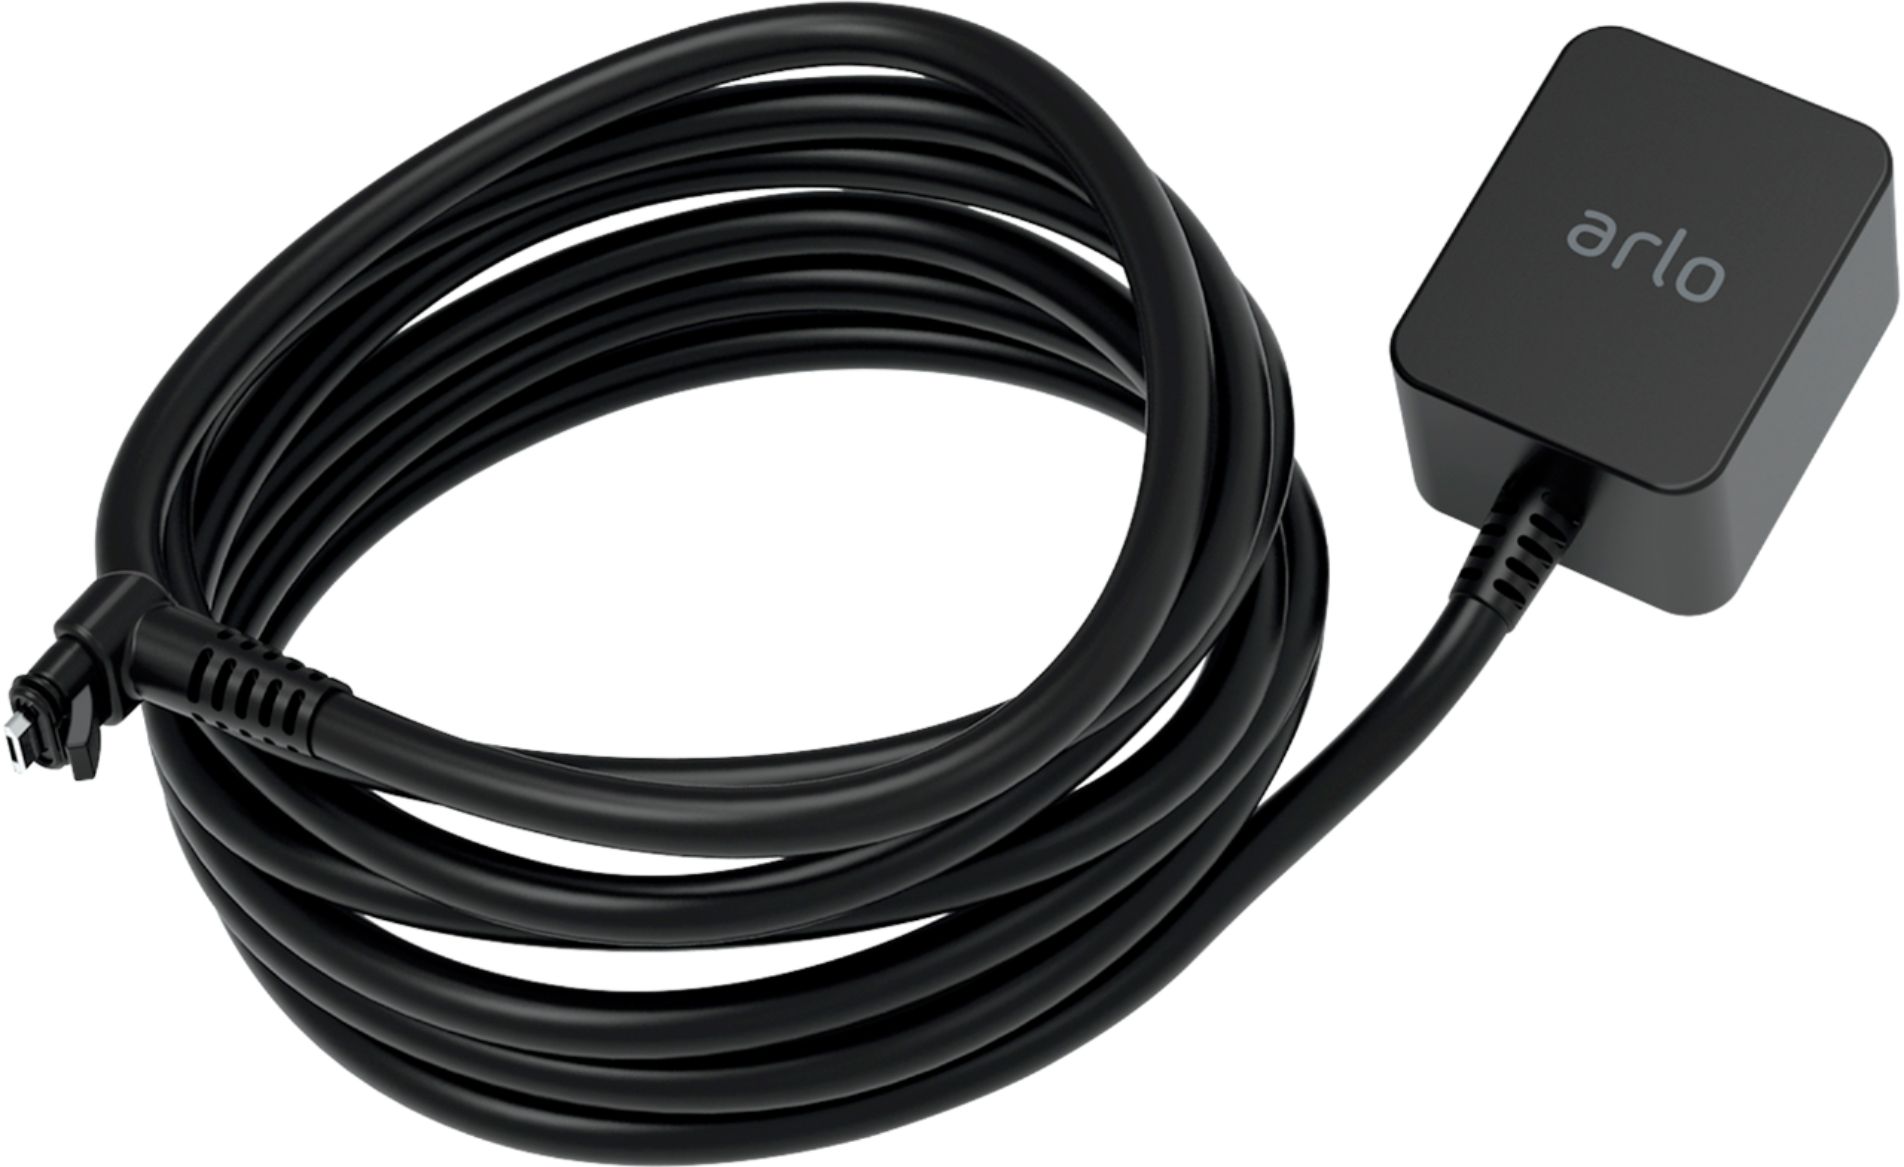 28ft Power Cable for Arlo Pro and Arlo Pro 2，with Quick Charge 3.0 Power Adapter,Continuously Operate Your Arlo Camera by Alertcam 